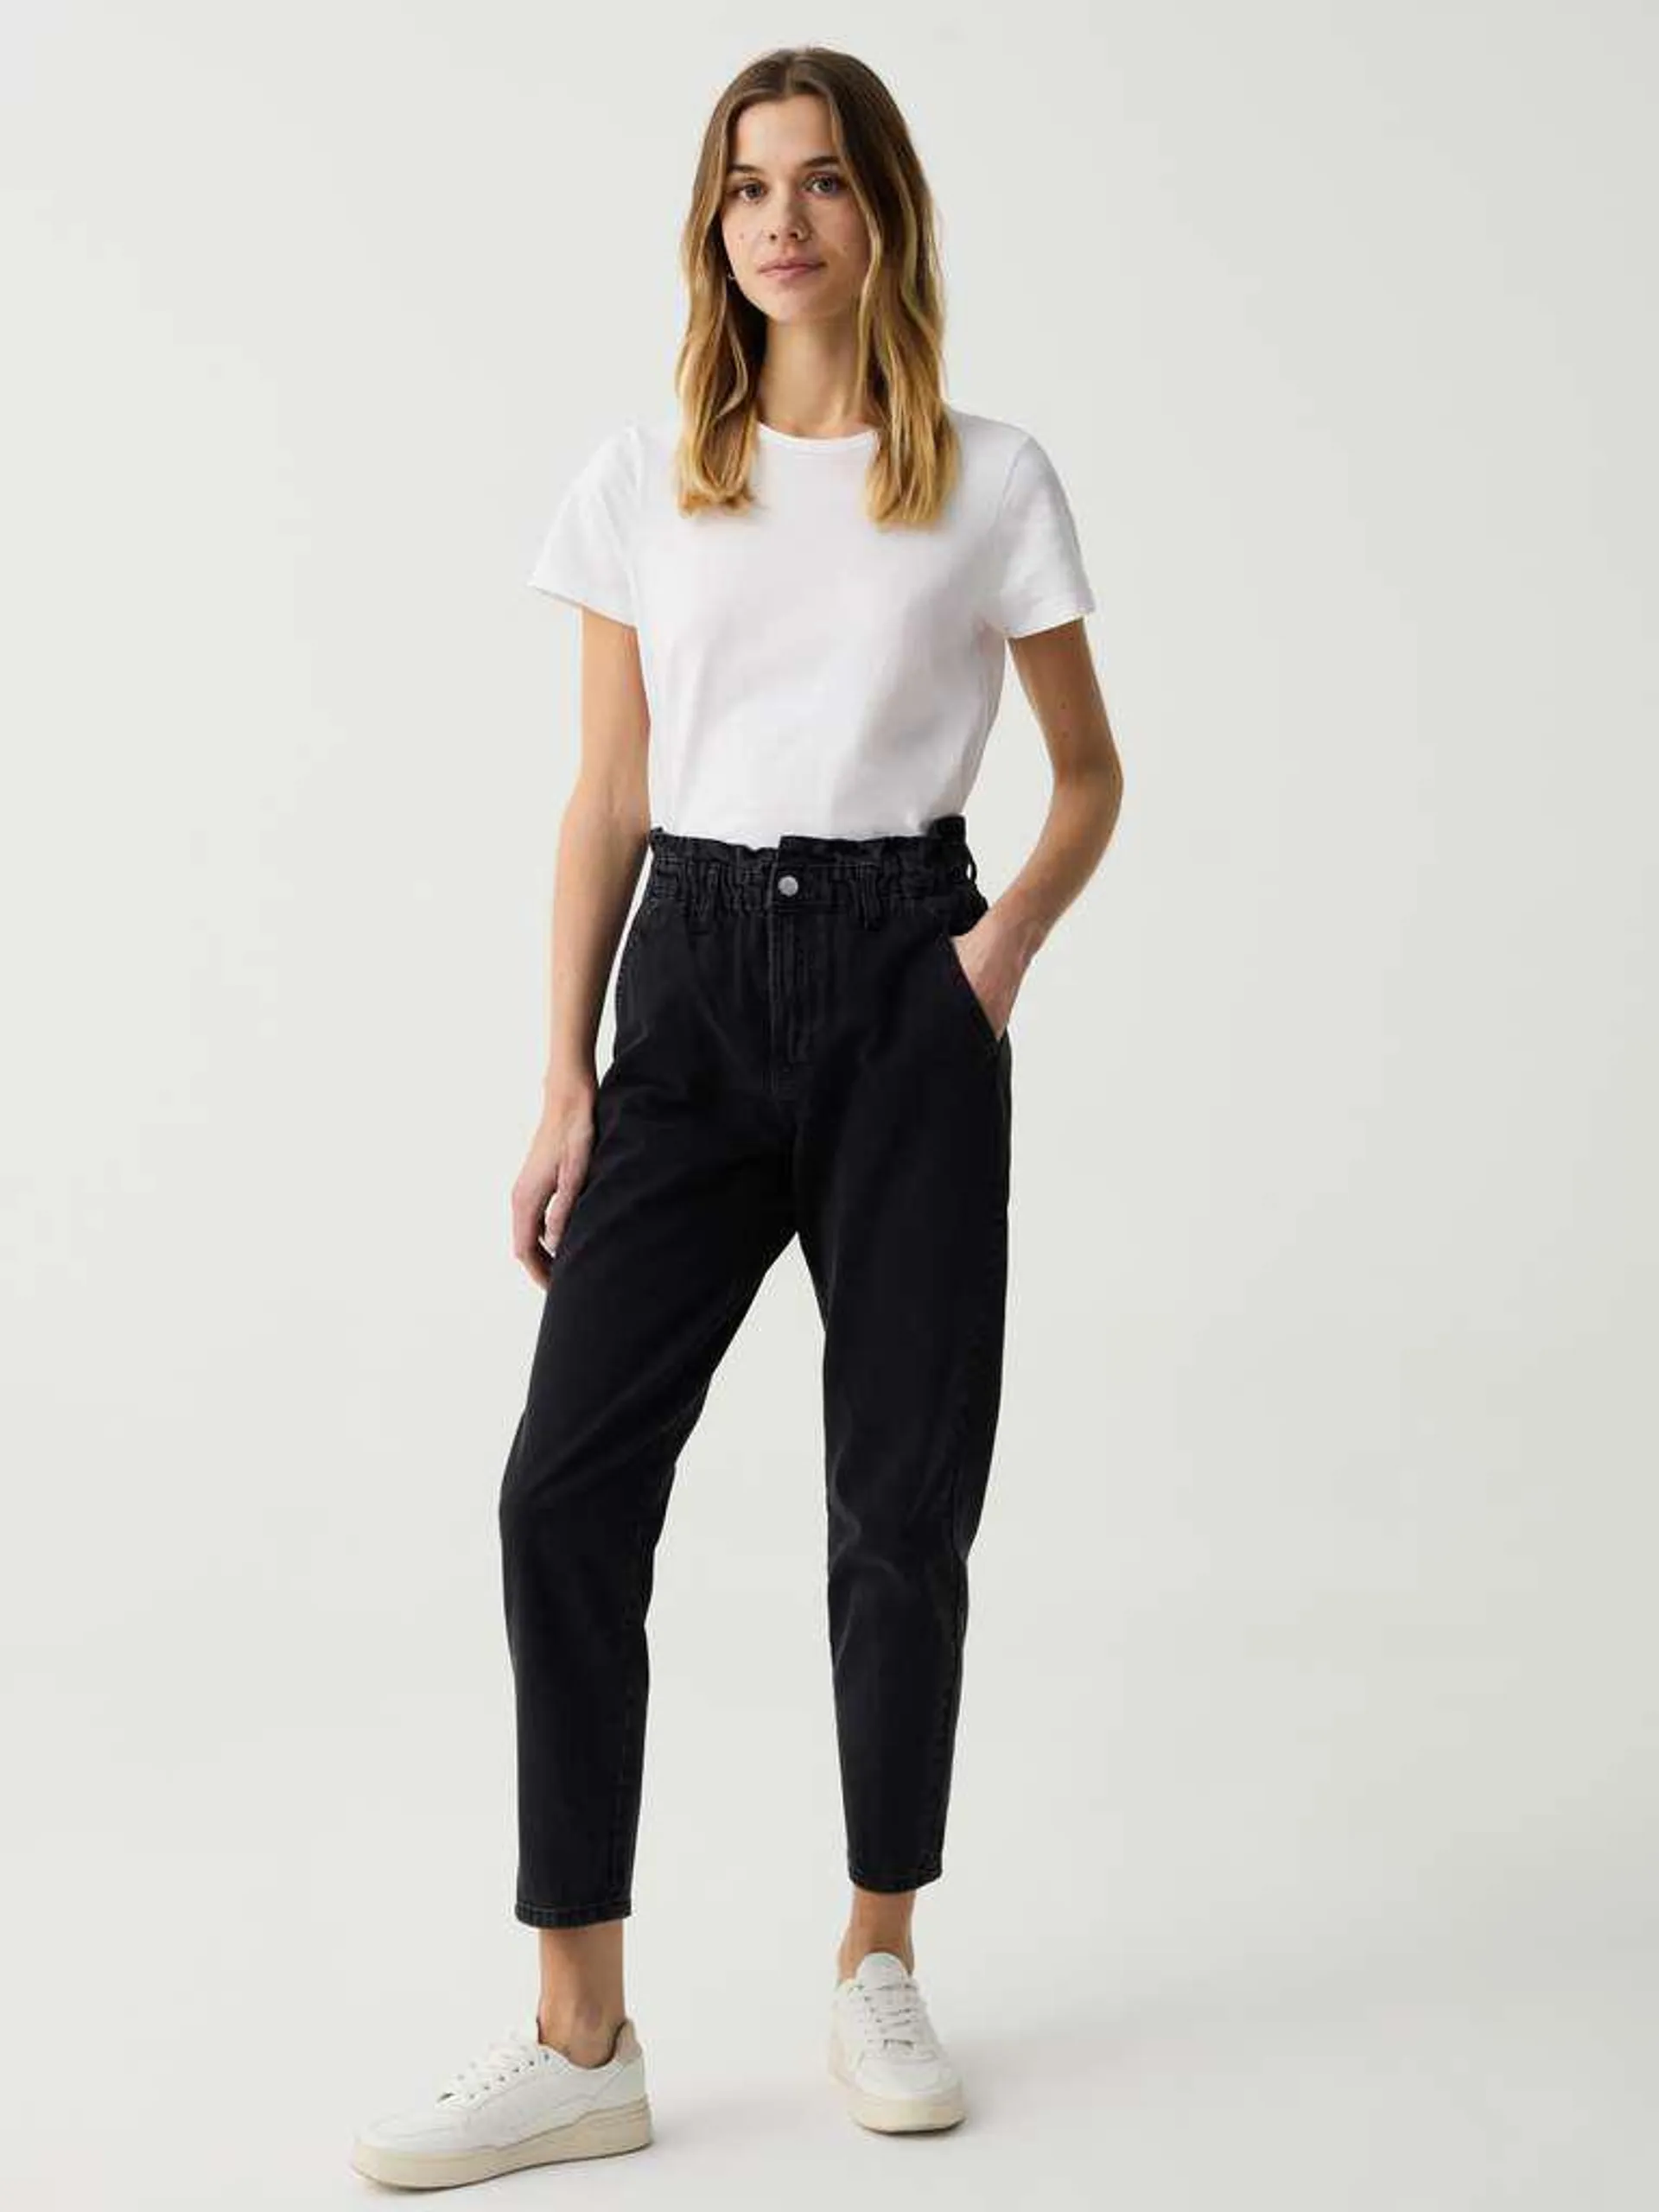 Graphite Grey Mum-fit cropped jeans